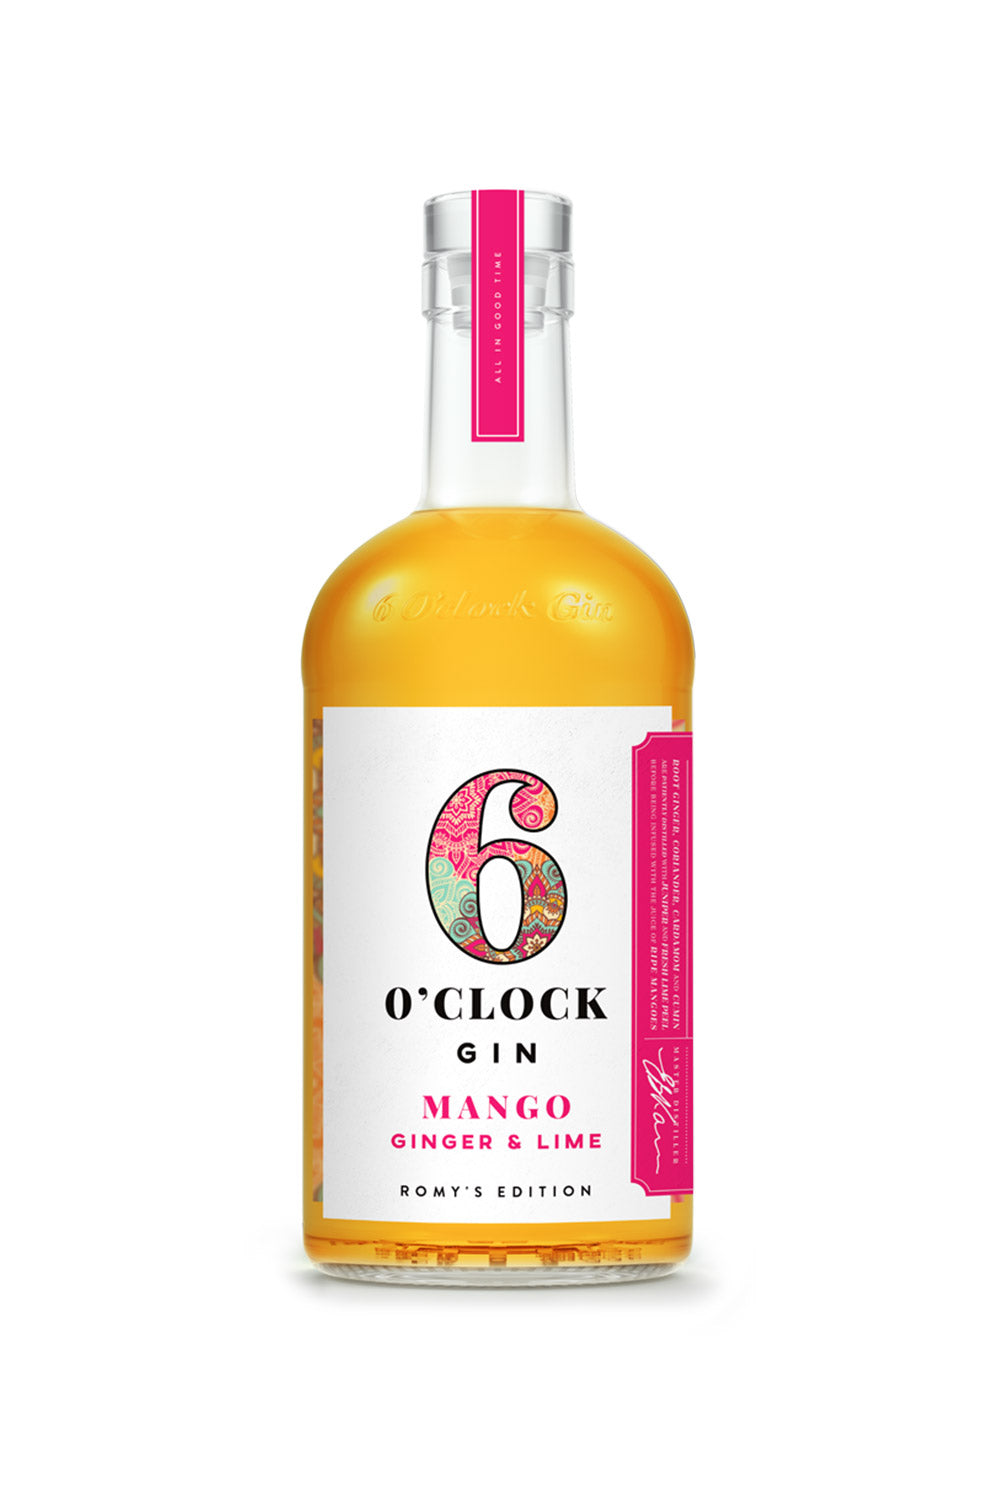 6 O'clock Gin Romy's Edition - Mango, Ginger & Lime 70cl